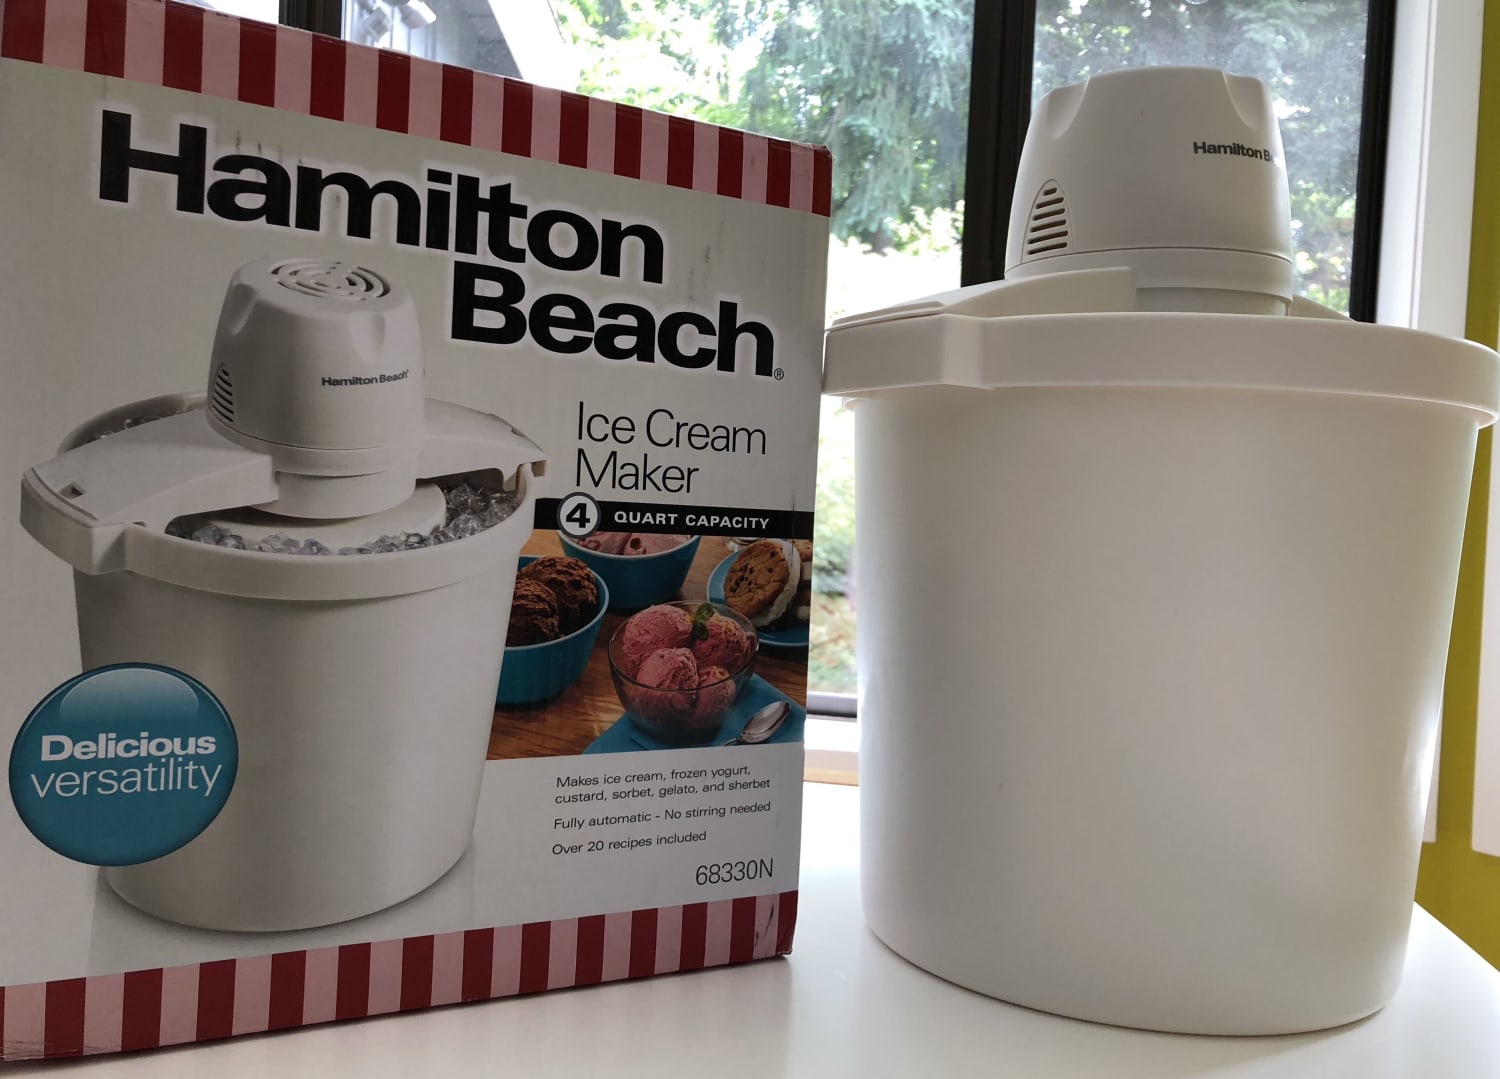 This Small $20 Gadget from Hamilton Beach Makes 'Life Easier